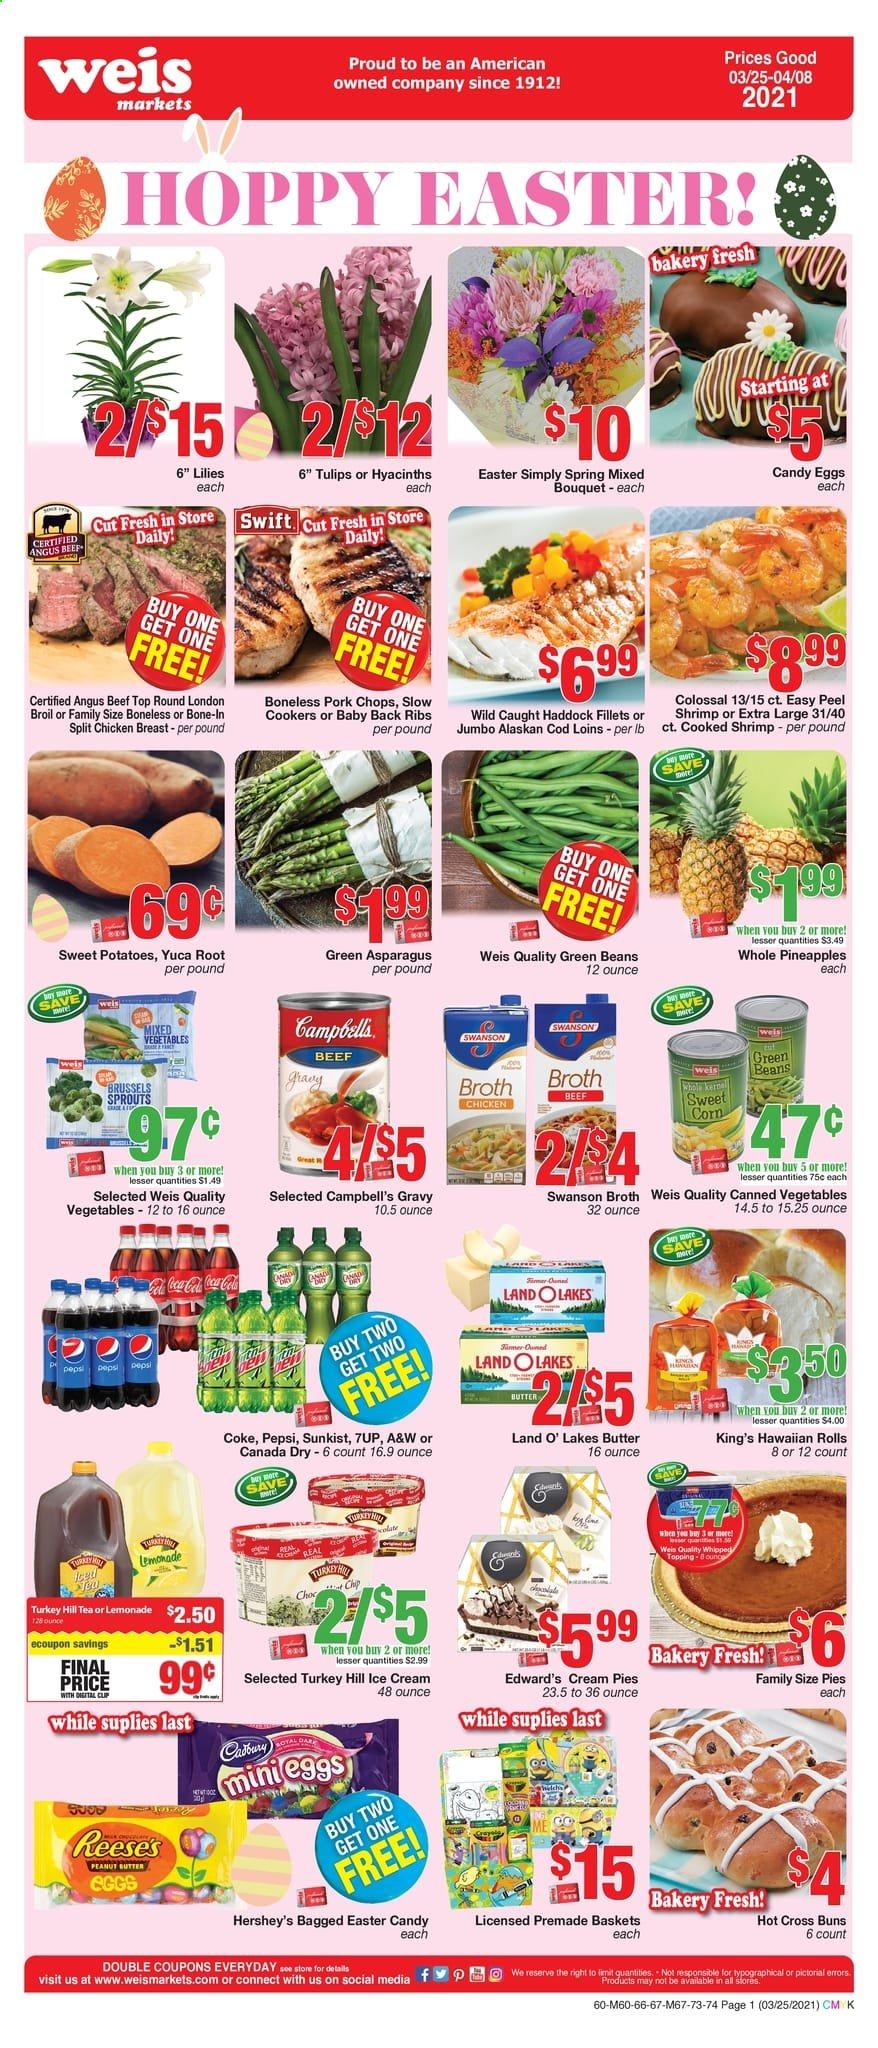 thumbnail - Weis Flyer - 03/25/2021 - 04/08/2021 - Sales products - sweet potato, hawaiian rolls, cream pie, buns, asparagus, beans, corn, green beans, brussel sprouts, sweet corn, chicken breasts, beef meat, pork chops, pork meat, pork back ribs, cod, haddock, shrimps, Campbell's, eggs, ice cream, Reese's, Hershey's, mixed vegetables, candy egg, Cadbury, topping, broth, canned vegetables, peanut butter, Canada Dry, Coca-Cola, lemonade, Pepsi, 7UP, A&W, tea, L'Or, tulip, bouquet, pineapple, potatoes. Page 1.